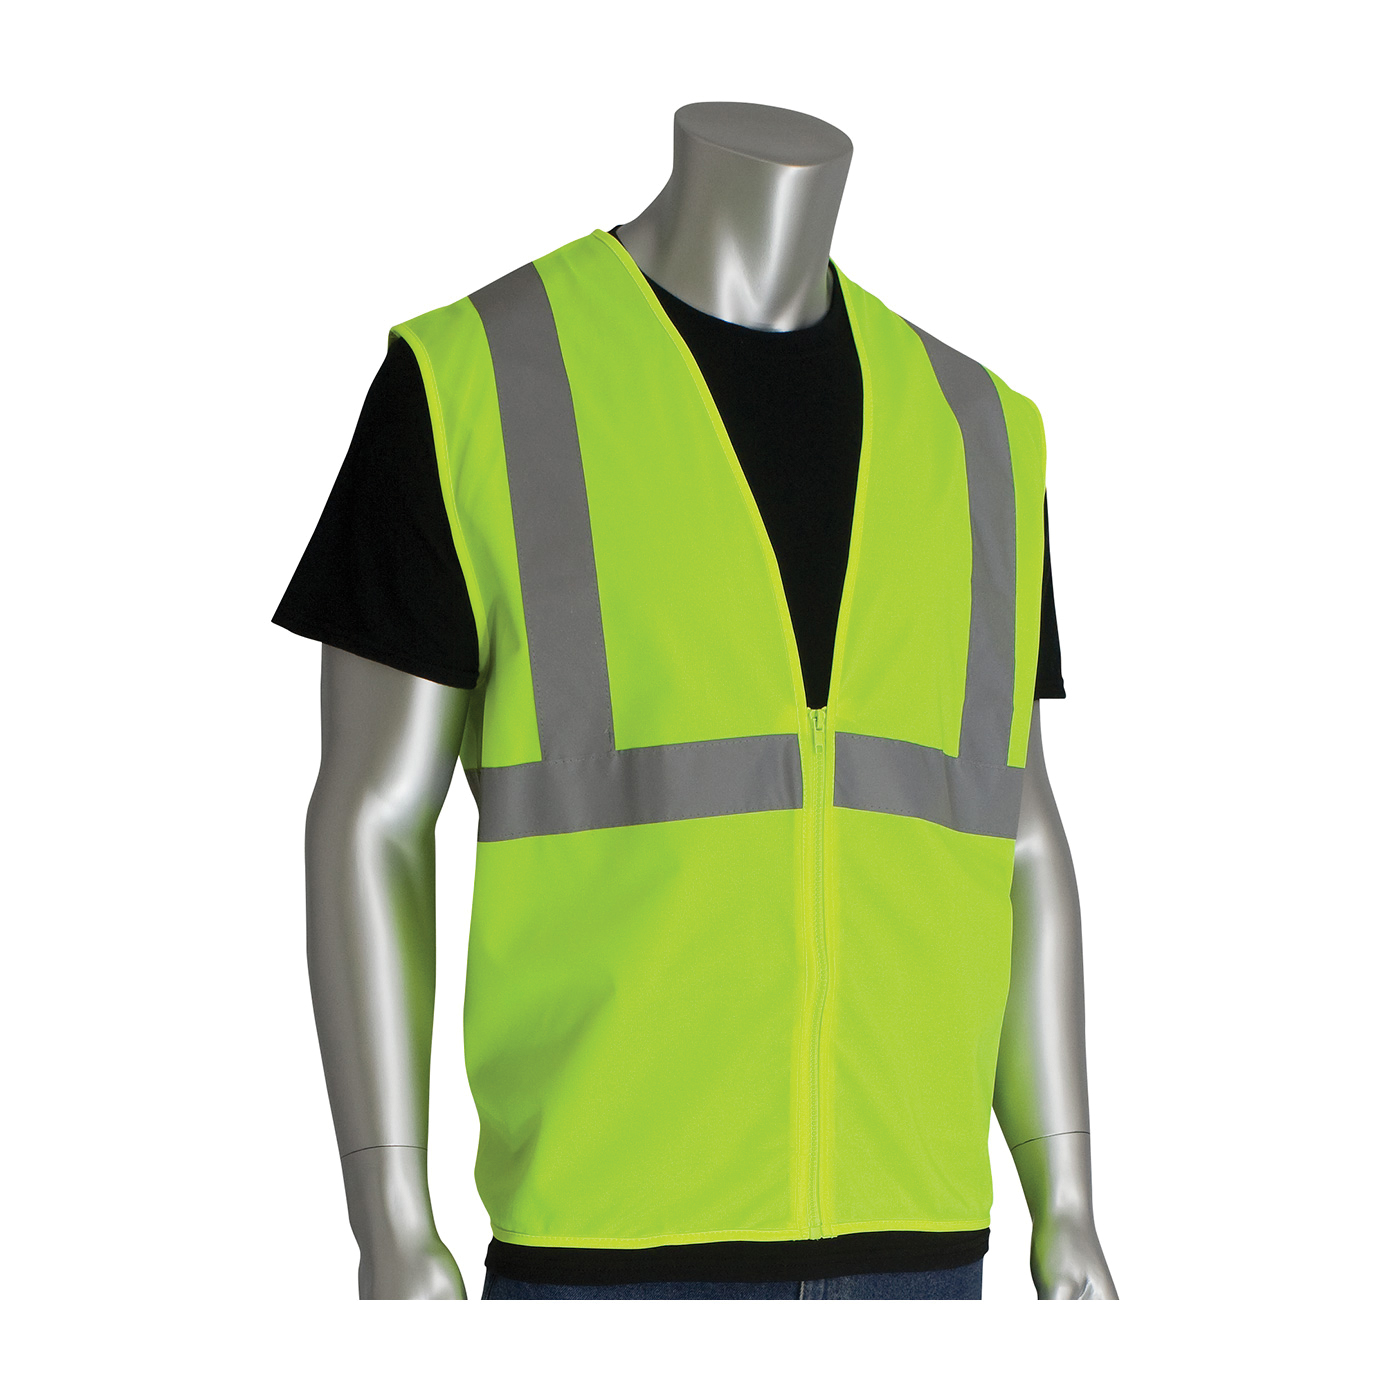 PIP® 302-WCENGZLY-M Standard Solid Vest, M, Hi-Viz Lime Yellow, Polyester Mesh, Zipper Closure, ANSI Class: Class 2, Specifications Met: ANSI 107 Type R Class 2